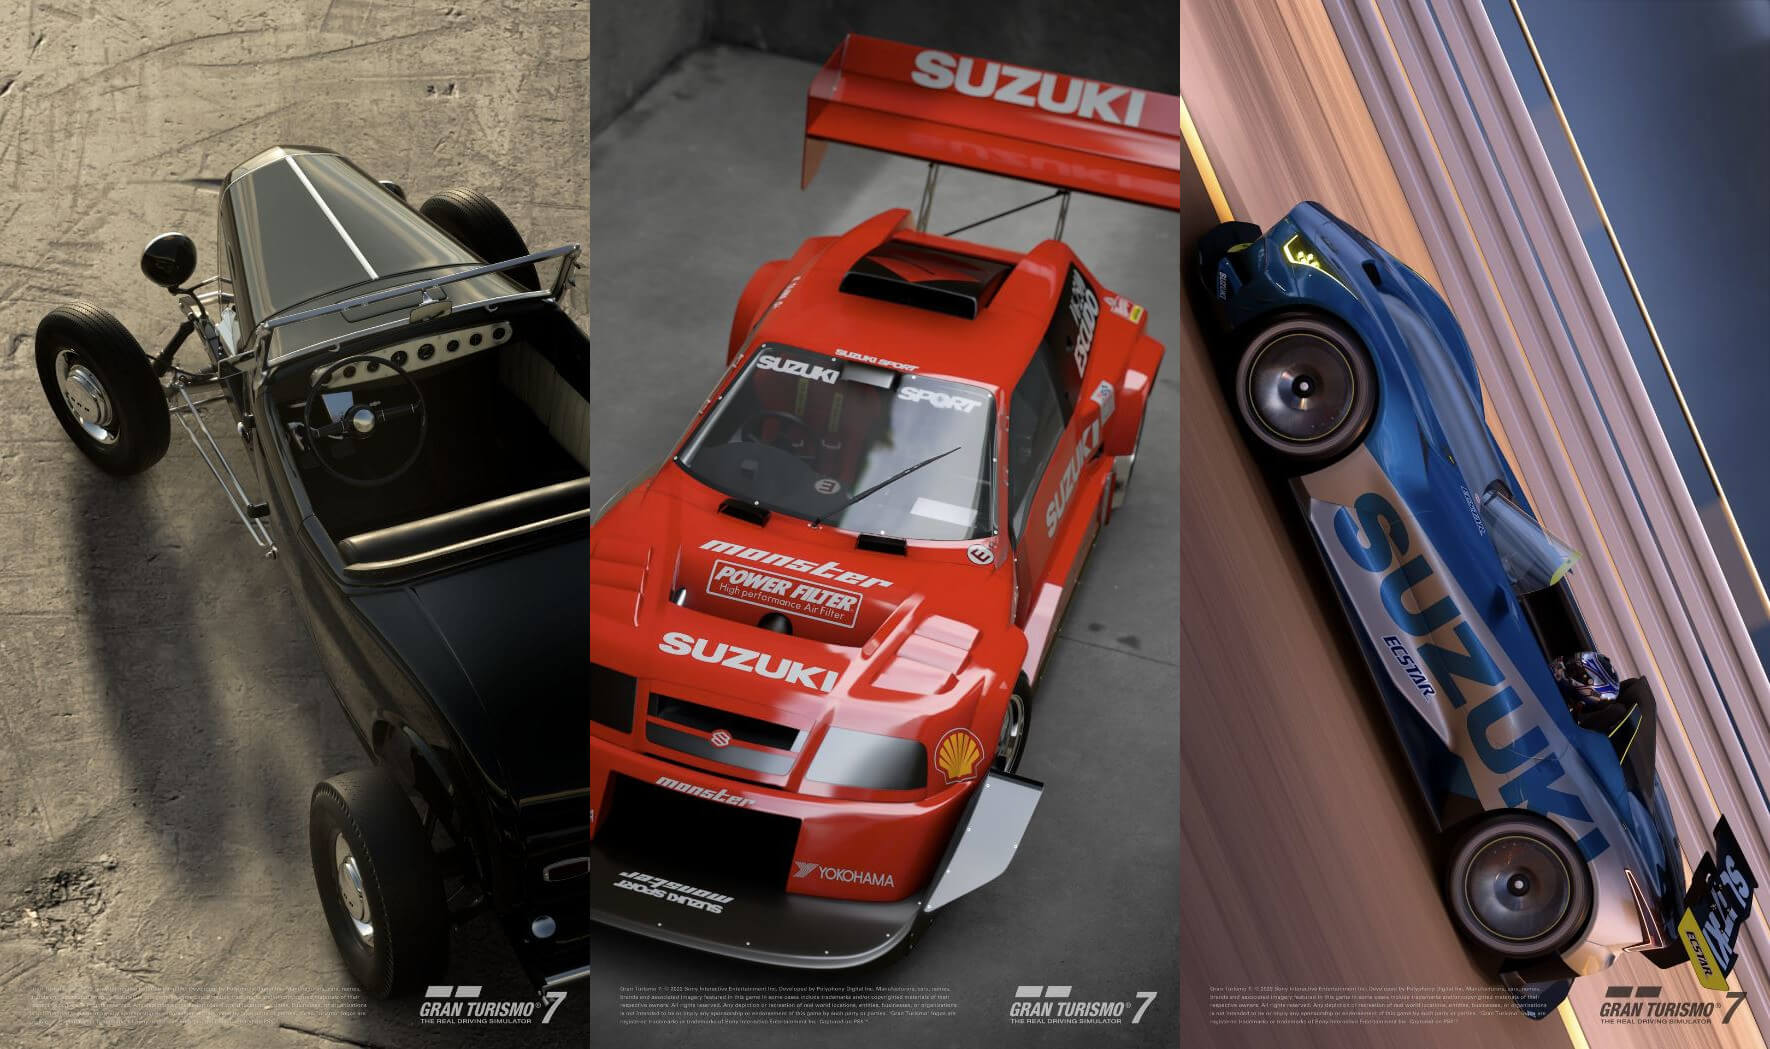 The three new cars being added as part of the Gran Turismo 7 update in June